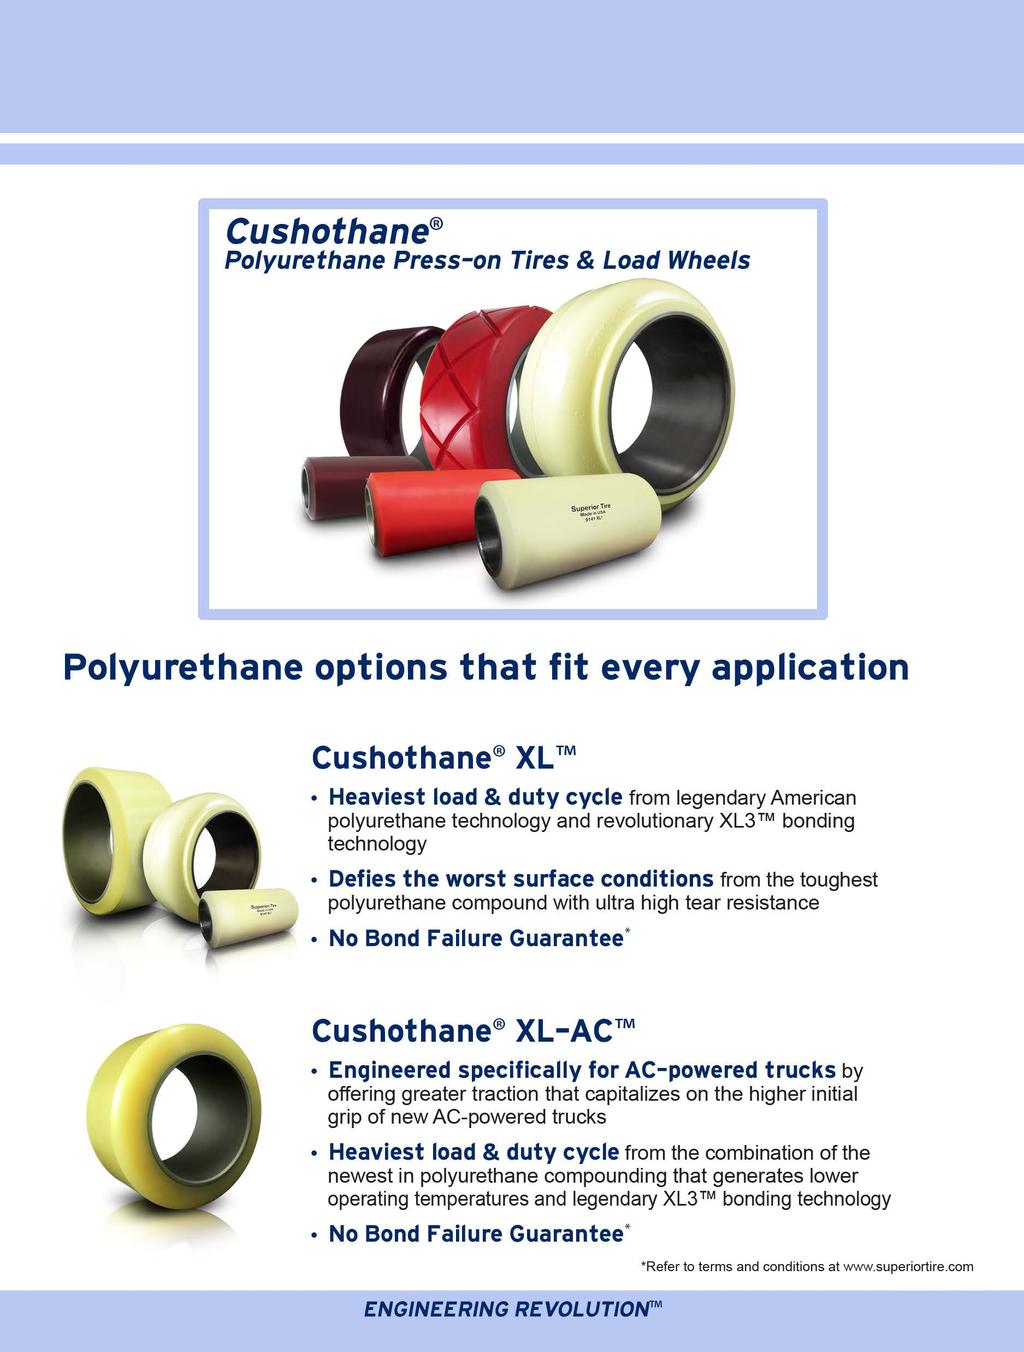 Cushothane Polyurethane Press-on Tires & Load Wheels Polyurethane options that fit every application Cushothane XLTM Heaviest load & duty cycle from legendary American polyurethane technology and